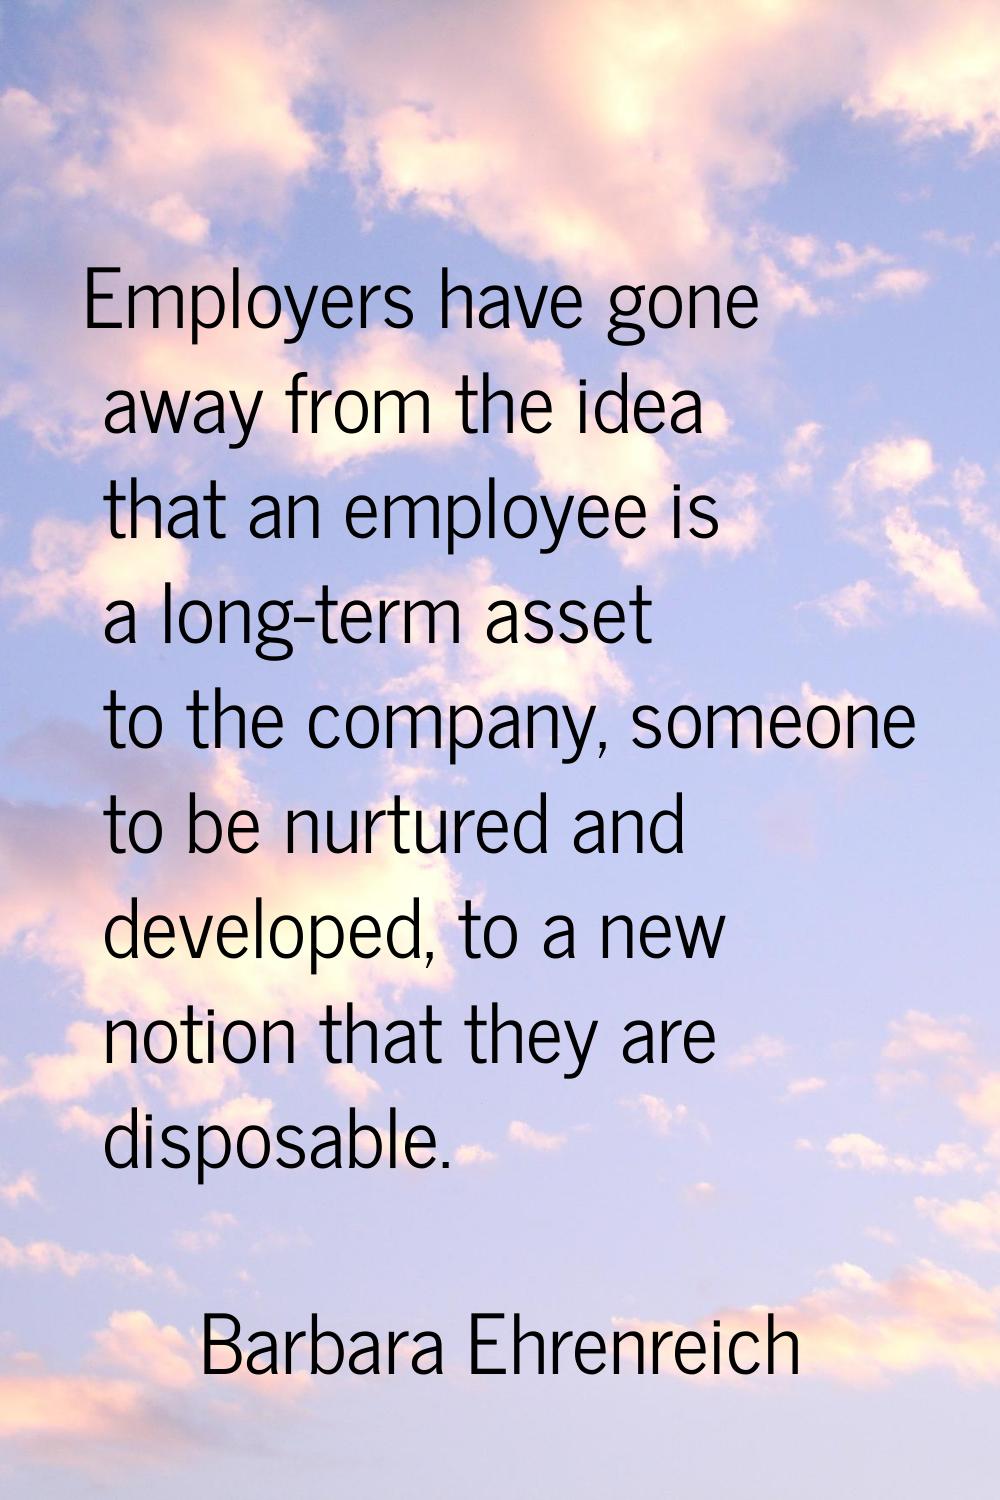 Employers have gone away from the idea that an employee is a long-term asset to the company, someon